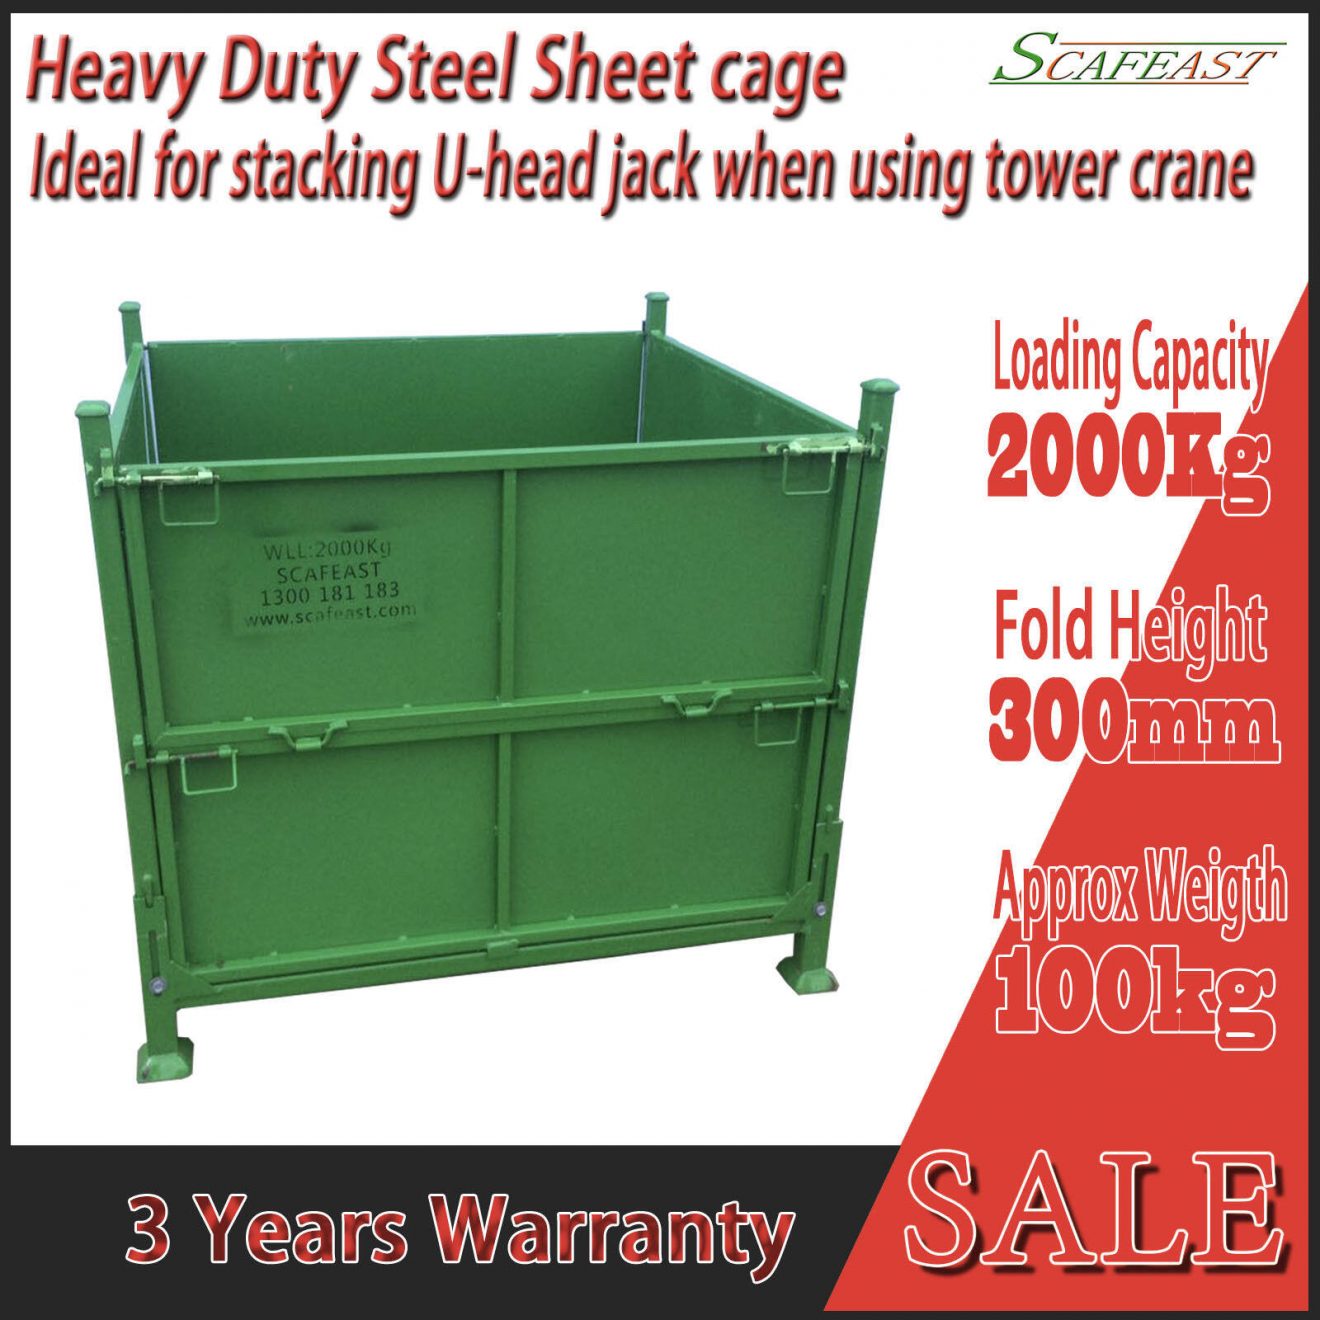 Steel Sheet Cage